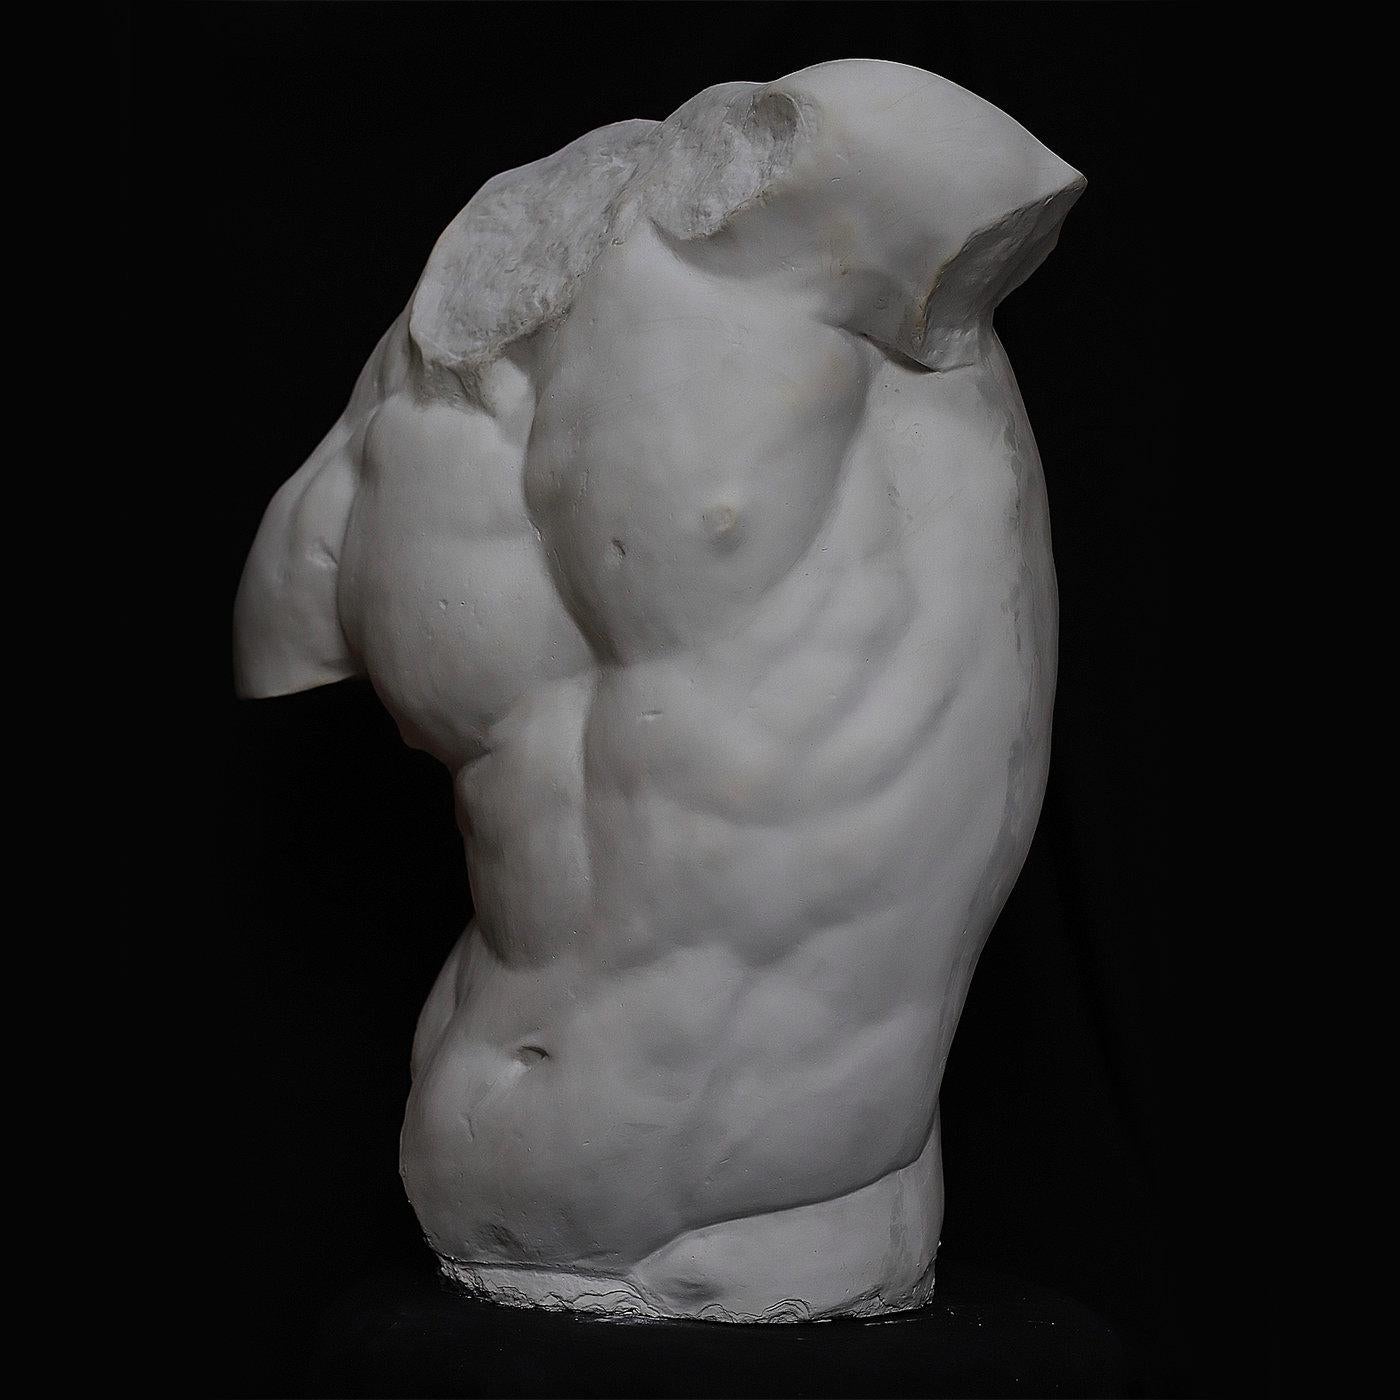 This is a plaster bust reproducing the Torso Gaddi, the famous fragmentary sculpture displayed in the Uffizi Museums in Florence, which inspired many great artists of the Renaissance, including Michelangelo. The piece, handcrafted by the skilled